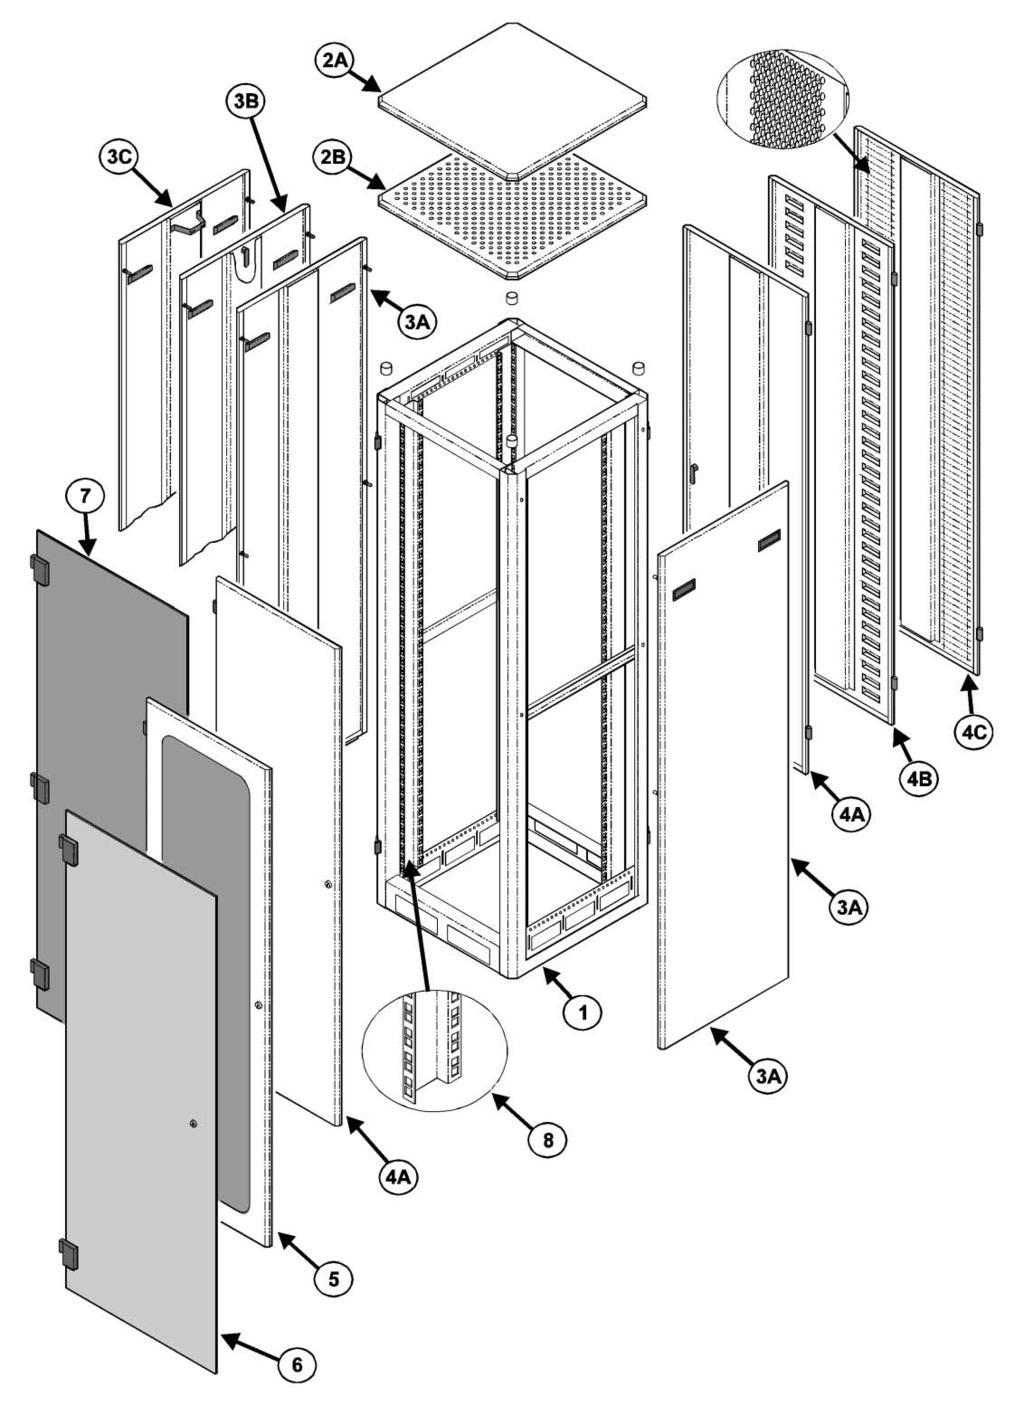 4 A Metal Door Metal doors can be fitted to the front and rear of the rack if required. The doors come ready assembled to the rack, fitted with keylocking and mounted on lift off hinges.